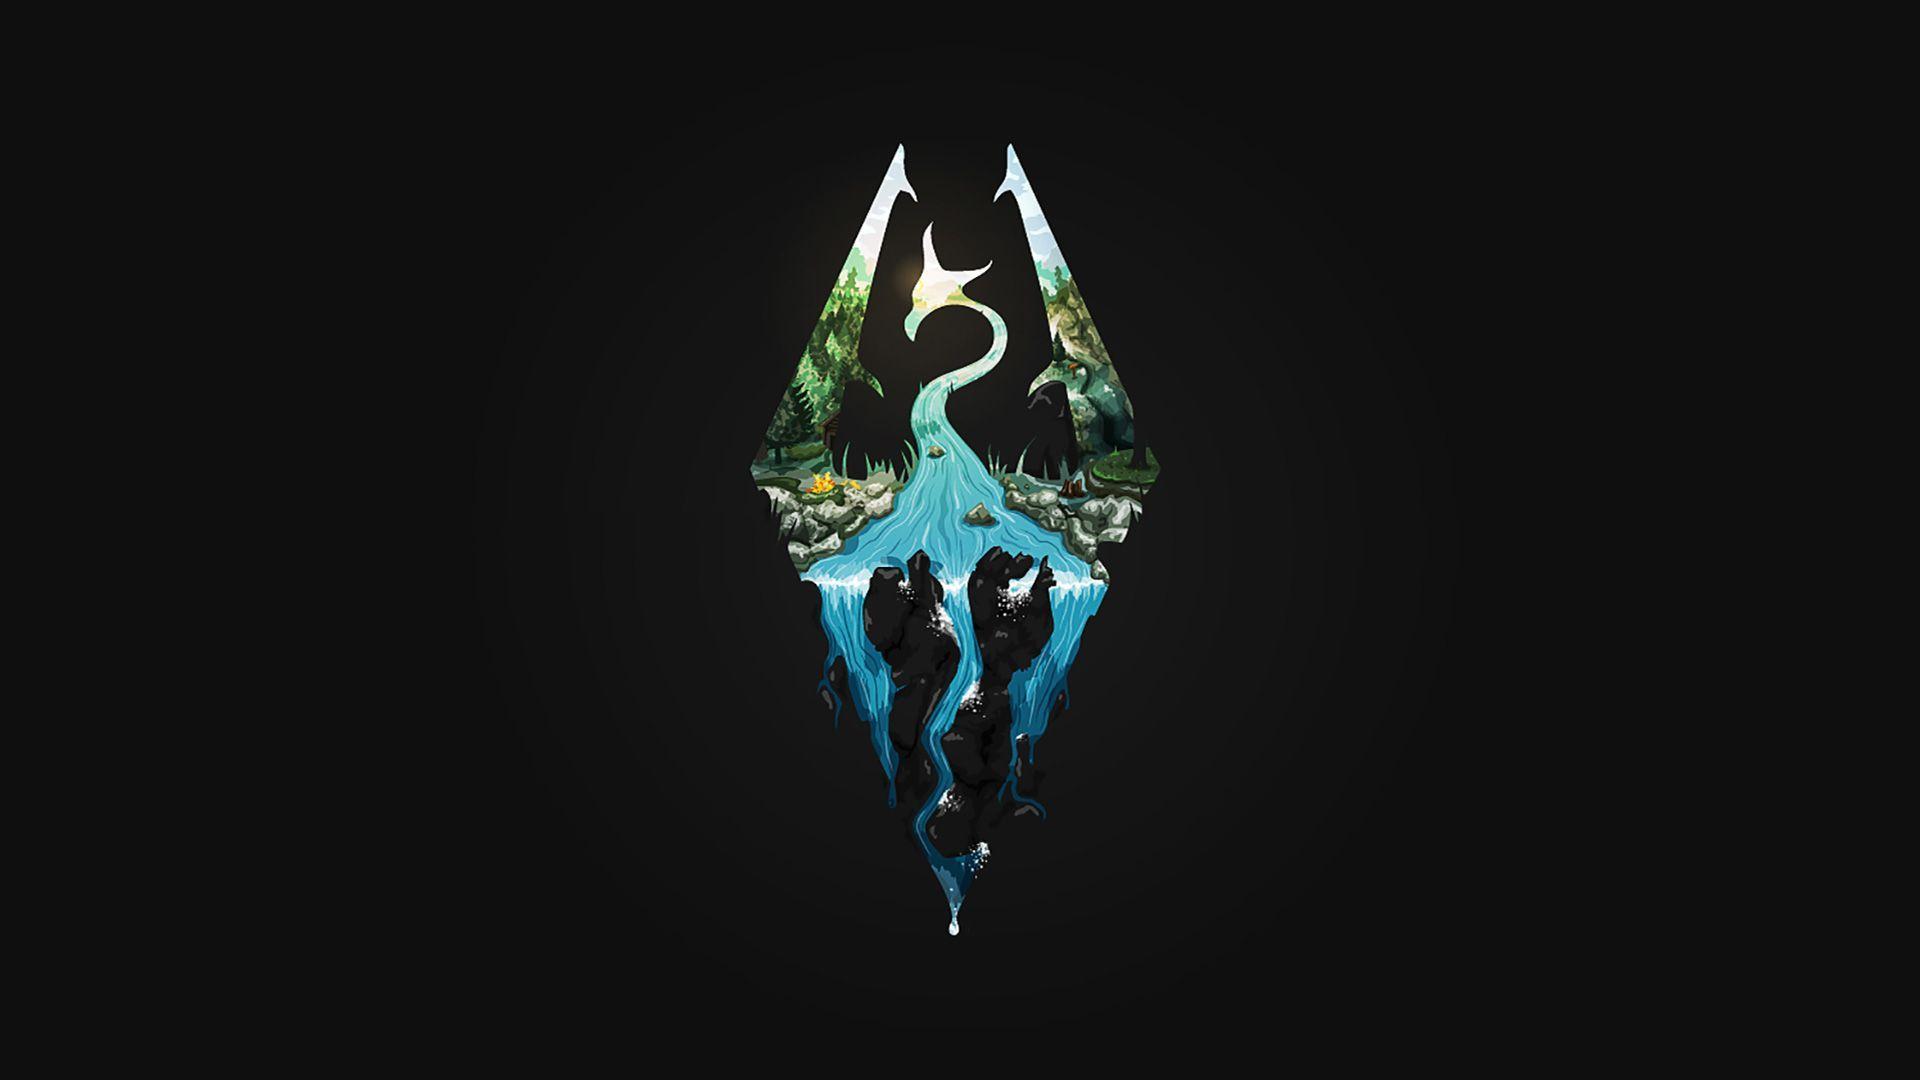 Anyone have an HD version of this wallpaper? #games #Skyrim